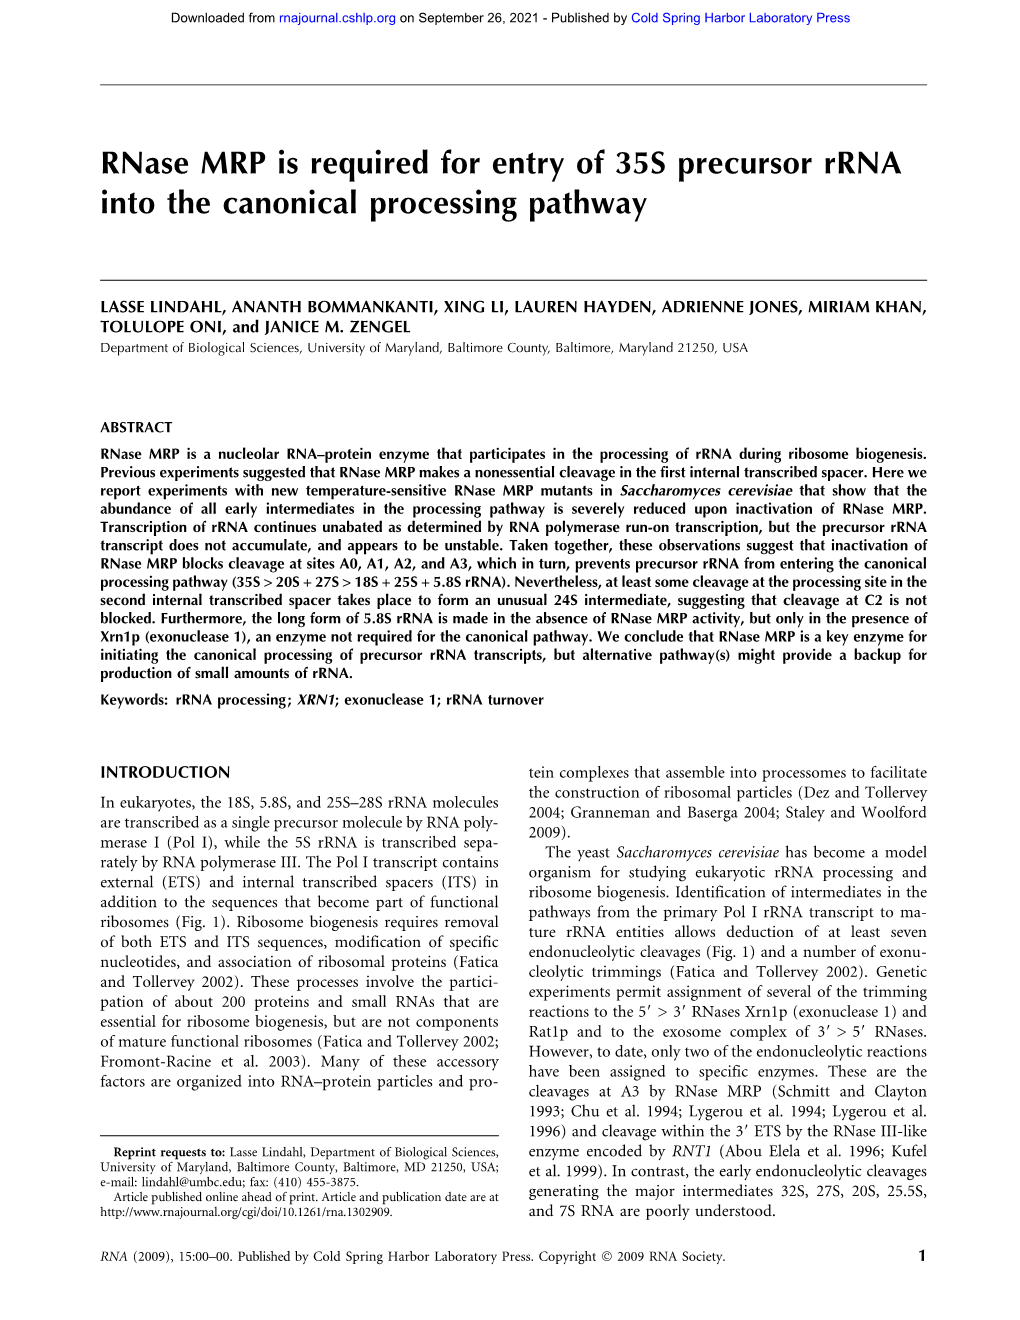 Rnase MRP Is Required for Entry of 35S Precursor Rrna Into the Canonical Processing Pathway